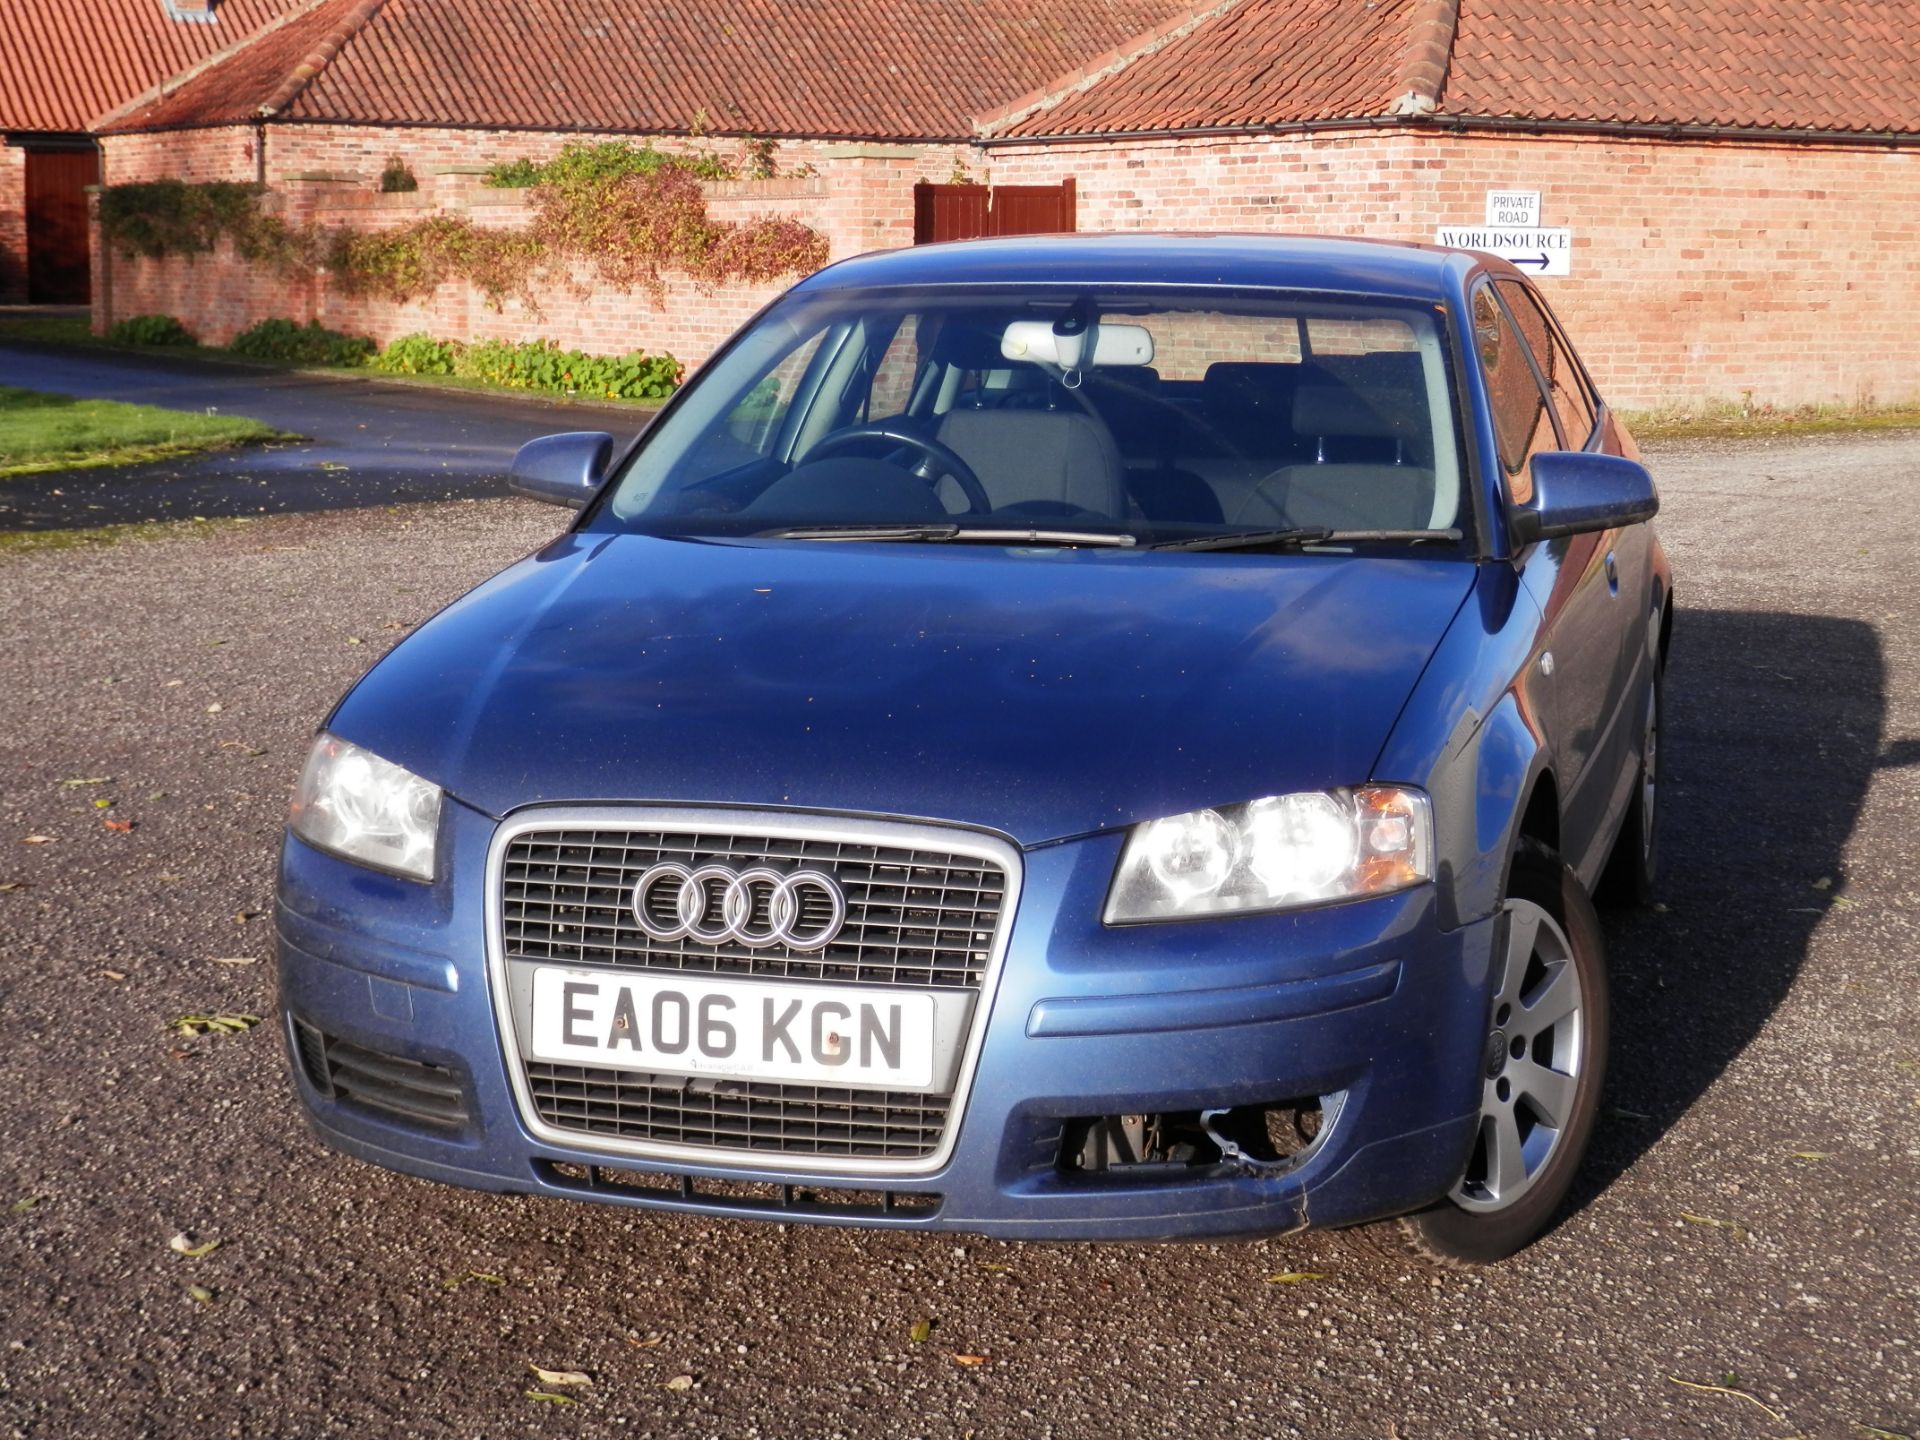 2006/06 AUDI A3 1.9 TDI, MOTFEB 2018, 170K MILES, HPI CLEAR. DRIVES VERY WELL. - Image 6 of 19